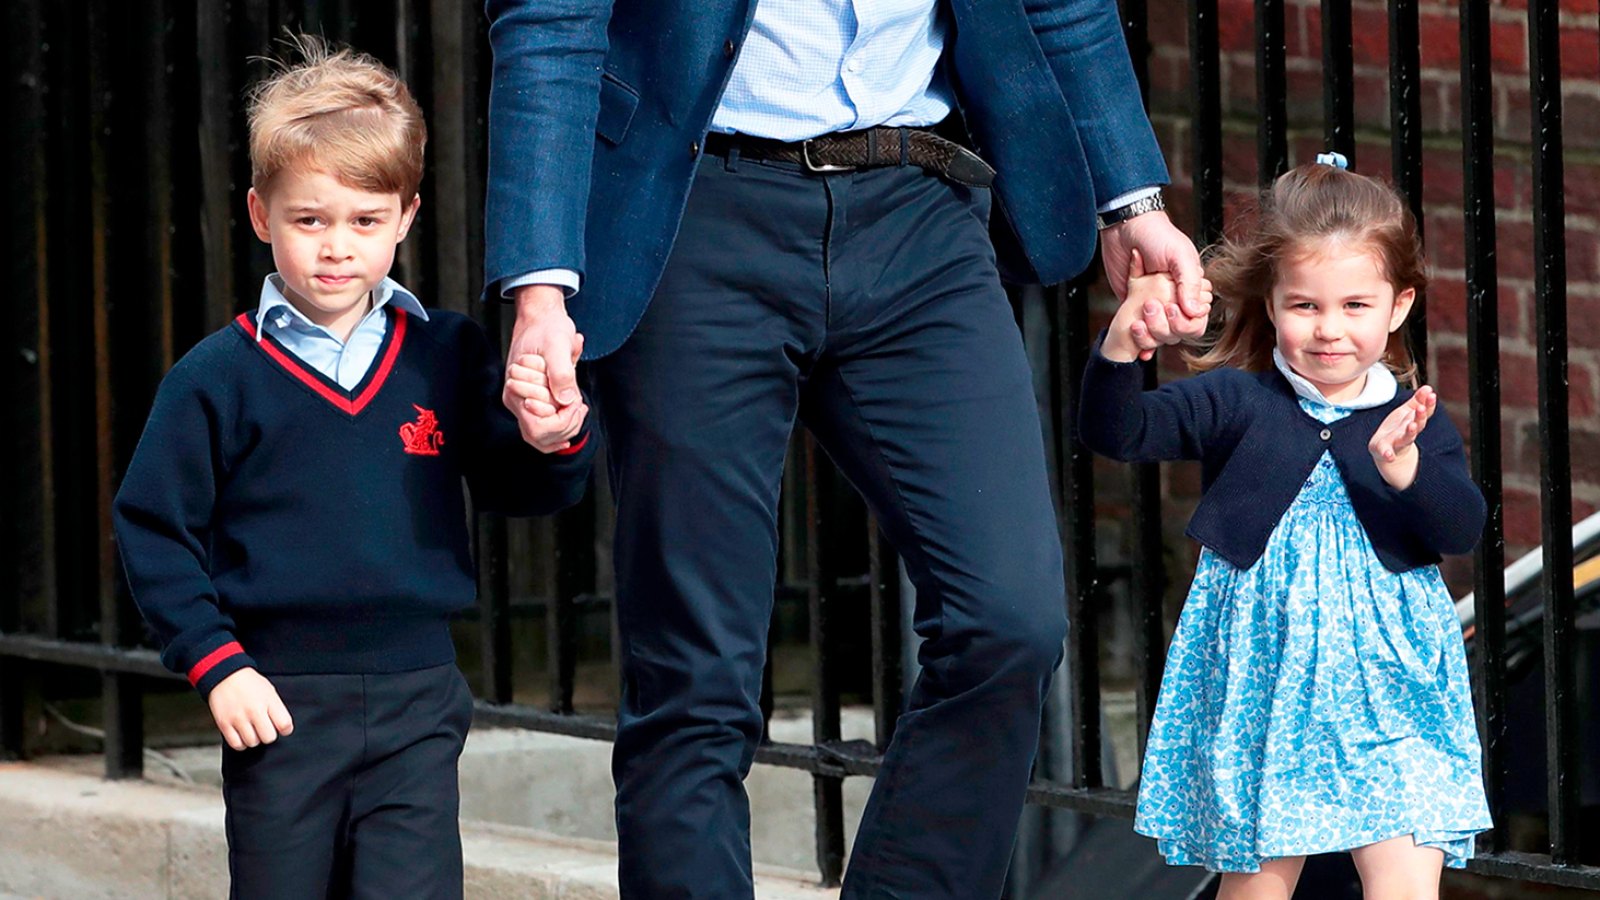 Prince William arrives with Prince George and Princess Charlotte at the Lindo Wing after Kate Middleton gave birth to their son at St. Mary's Hospital on April 23, 2018 in London, England.